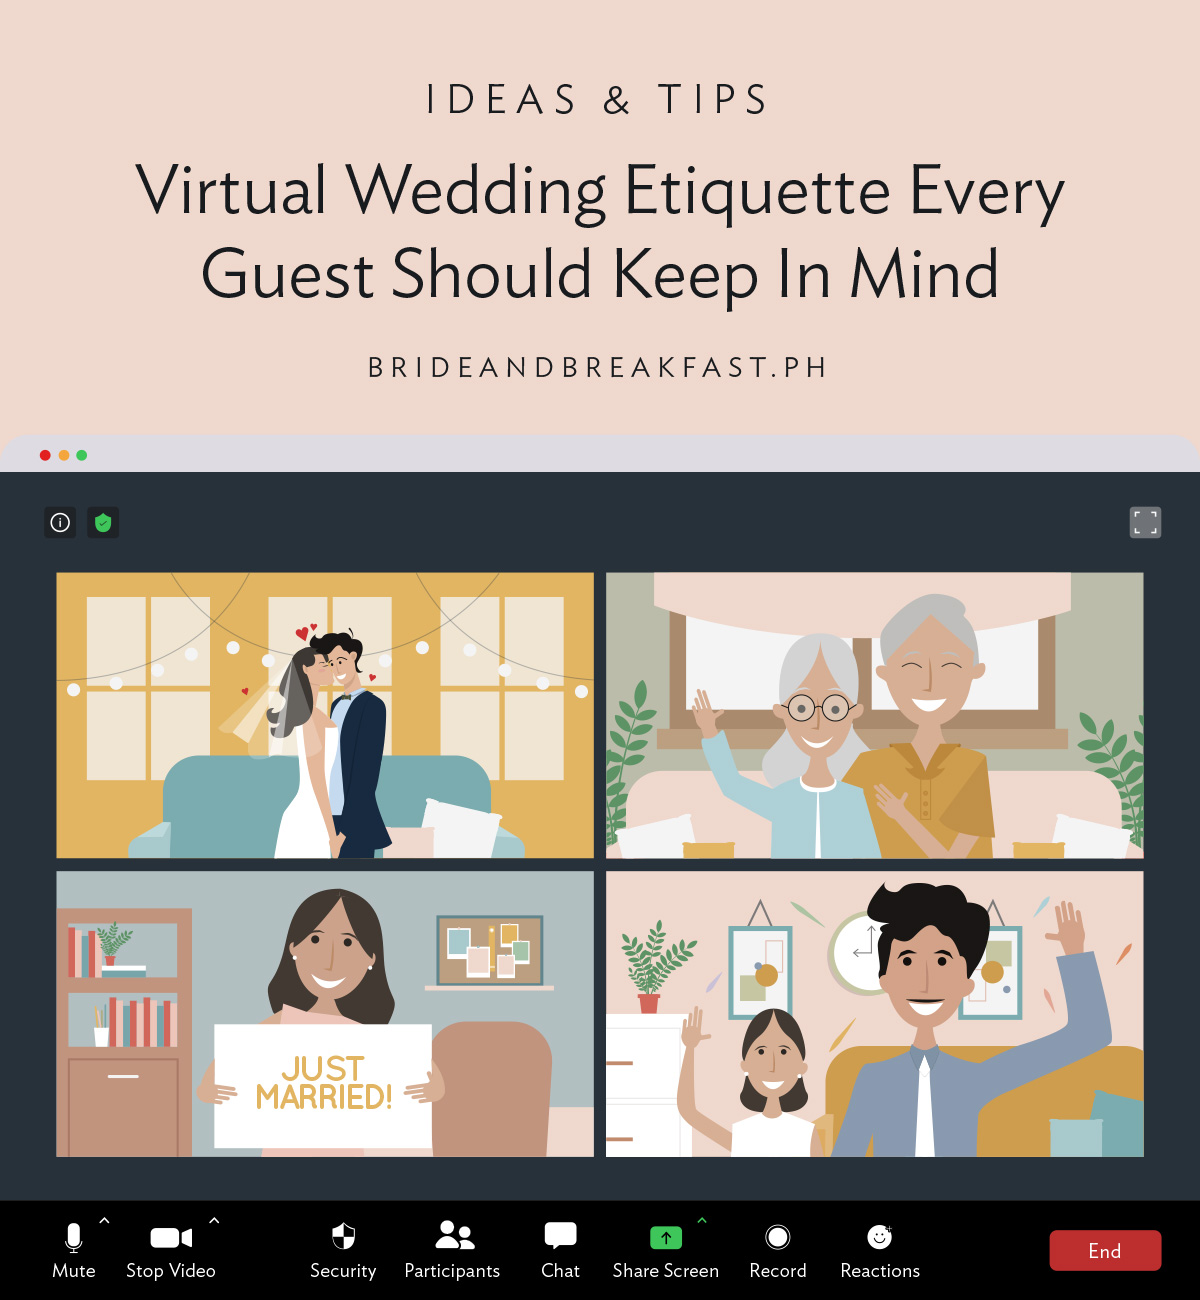 Virtual Wedding Etiquette Every Guest Should Keep In Mind